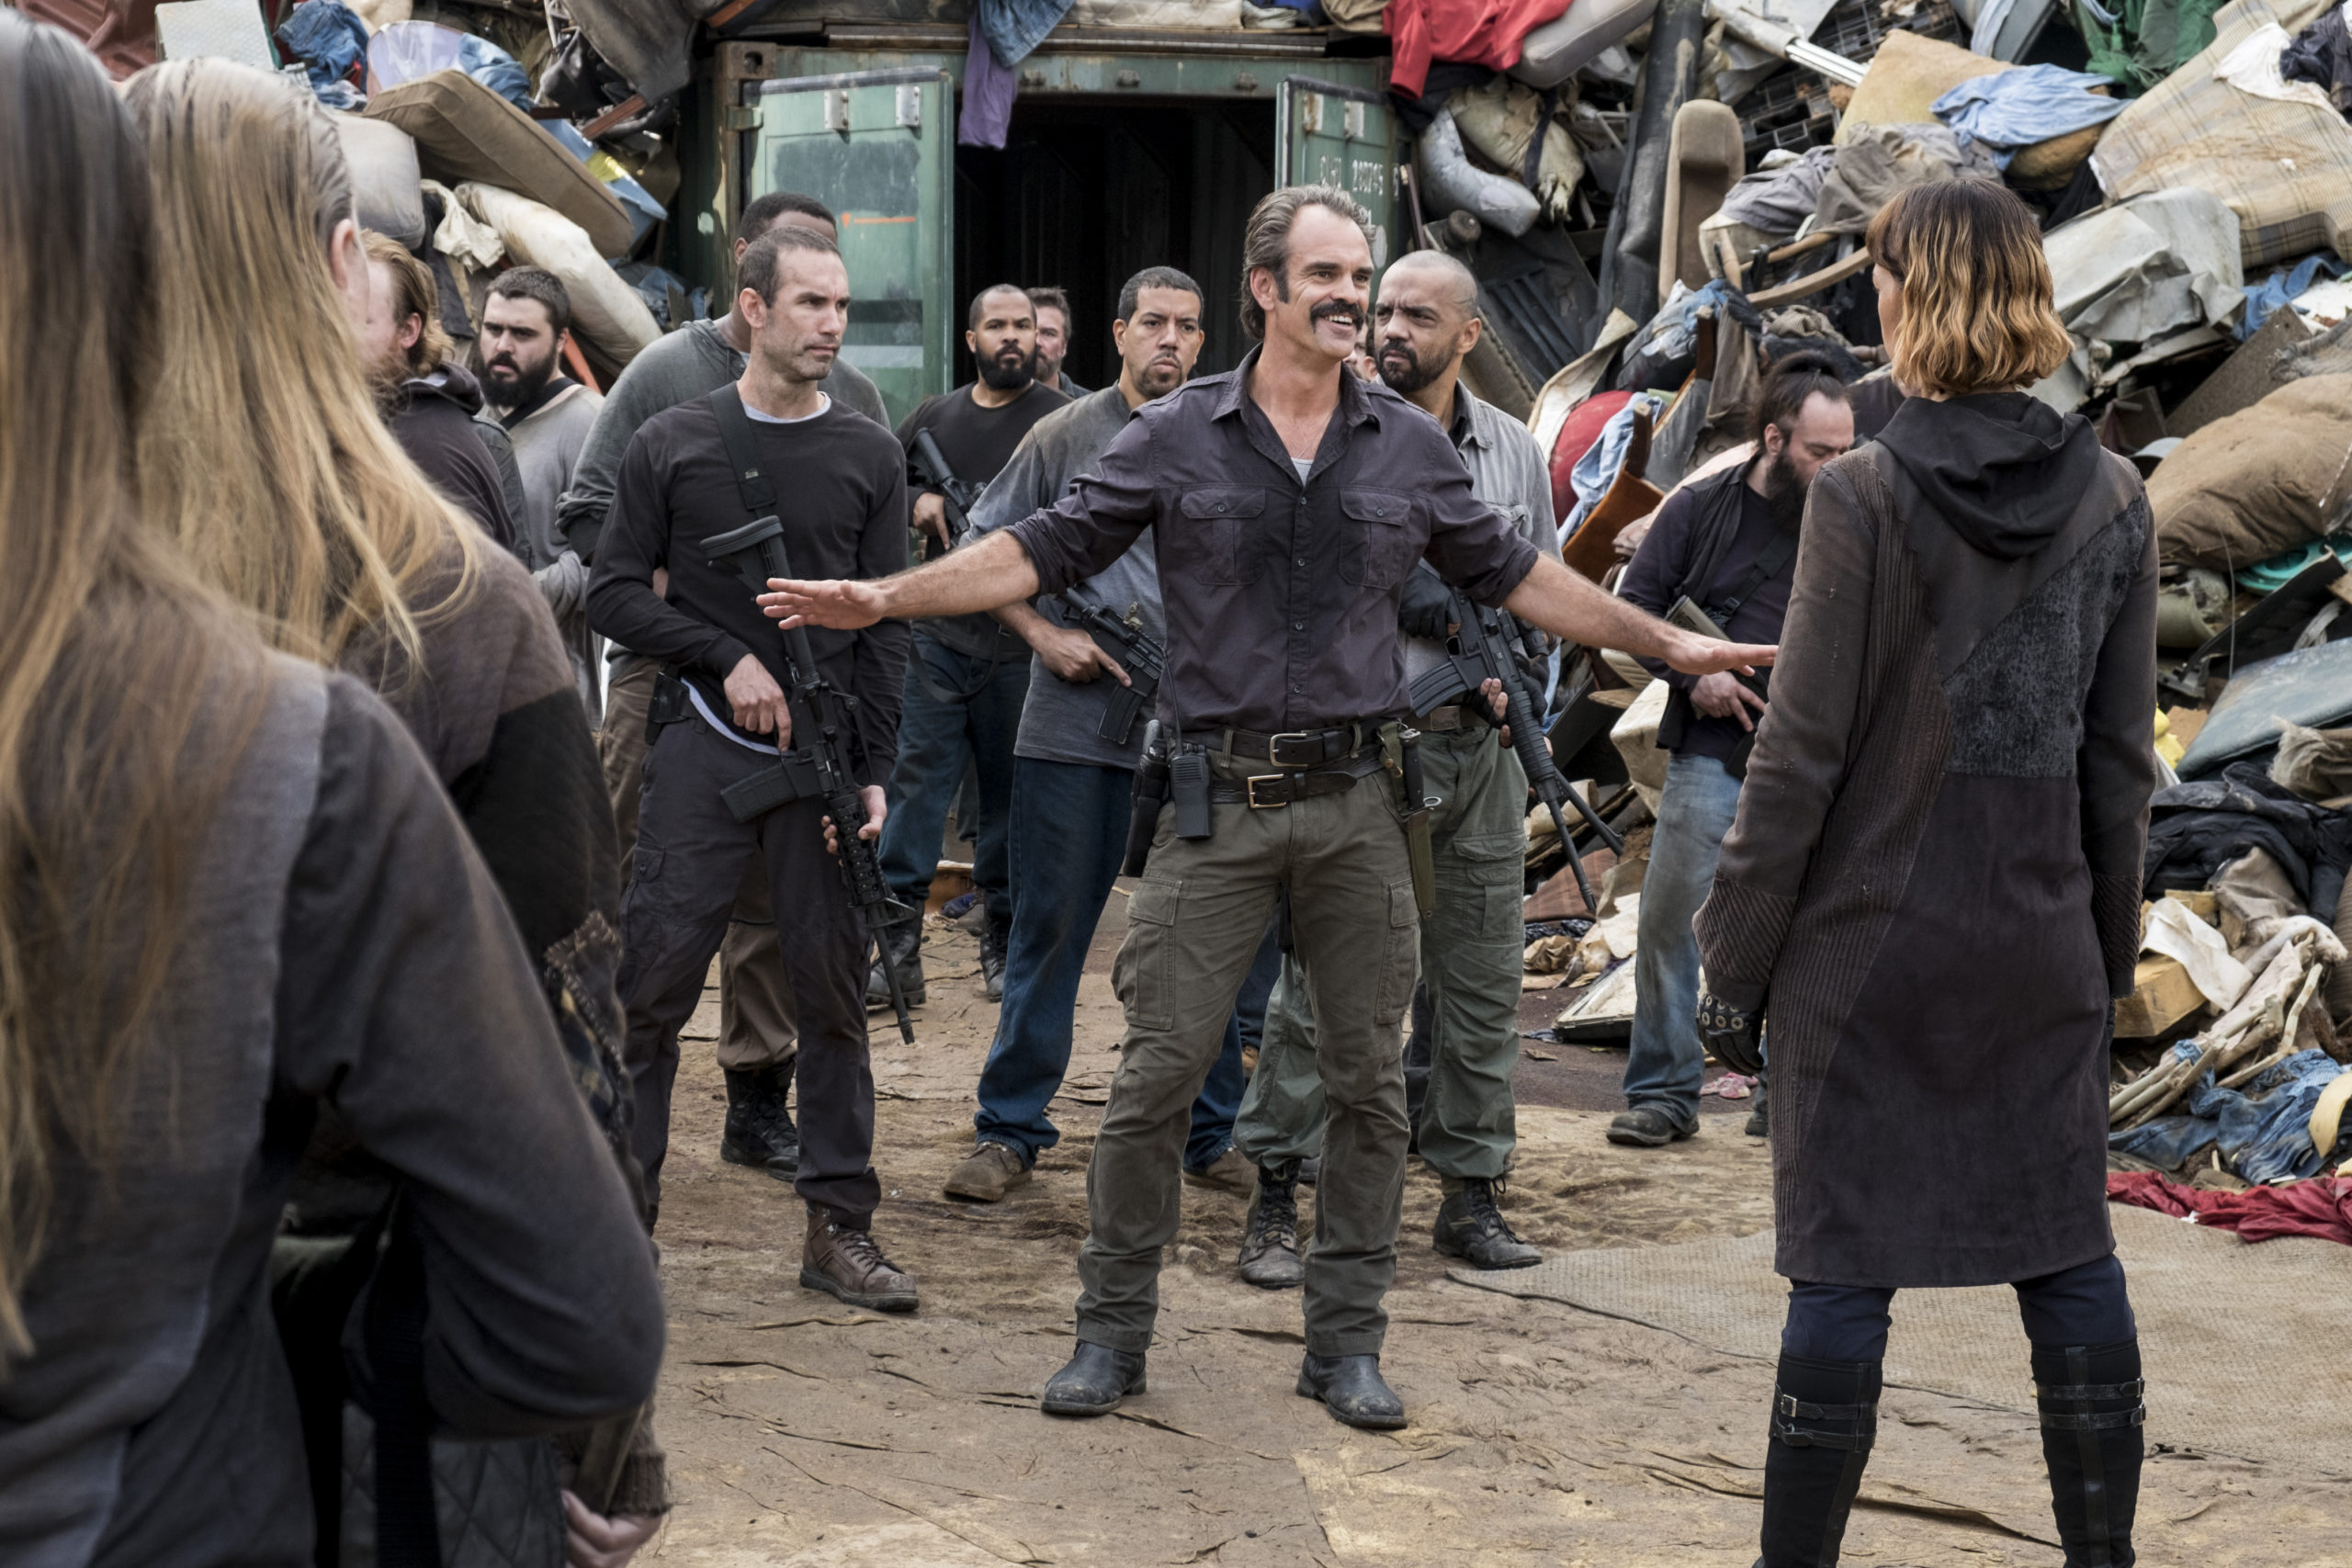 That Was A Truly Infuriating Episode Of The Walking Dead